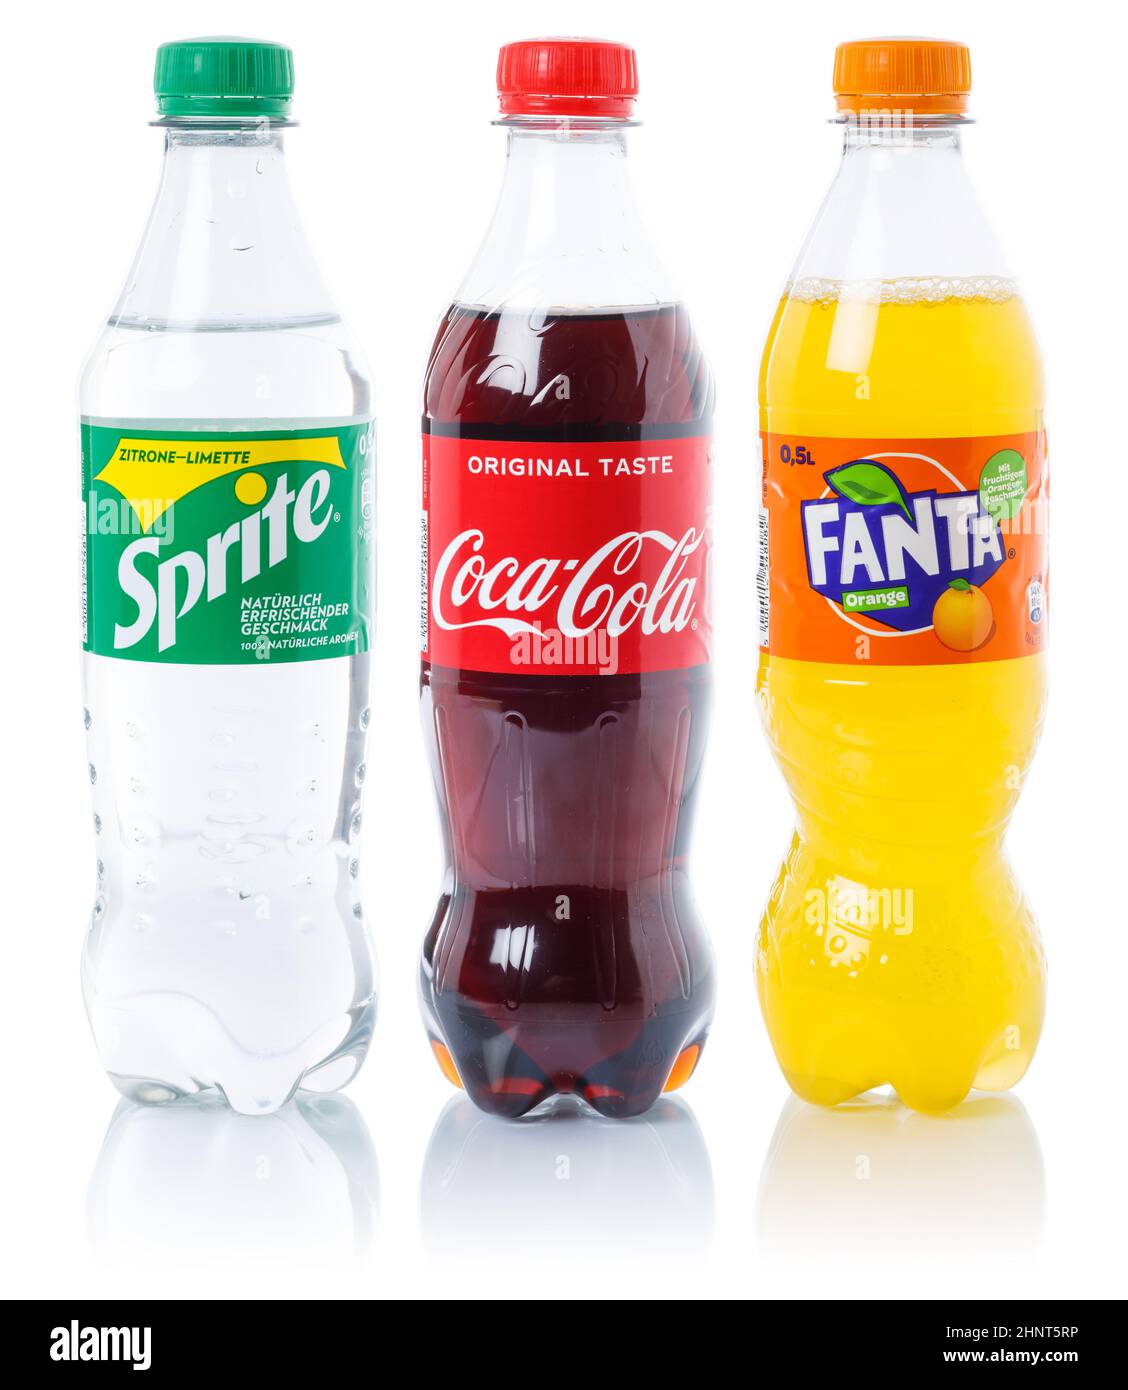 Coca Cola Coca-Cola Fanta Sprite products lemonade drinks in plastic bottles isolated on a white background Stock Photo